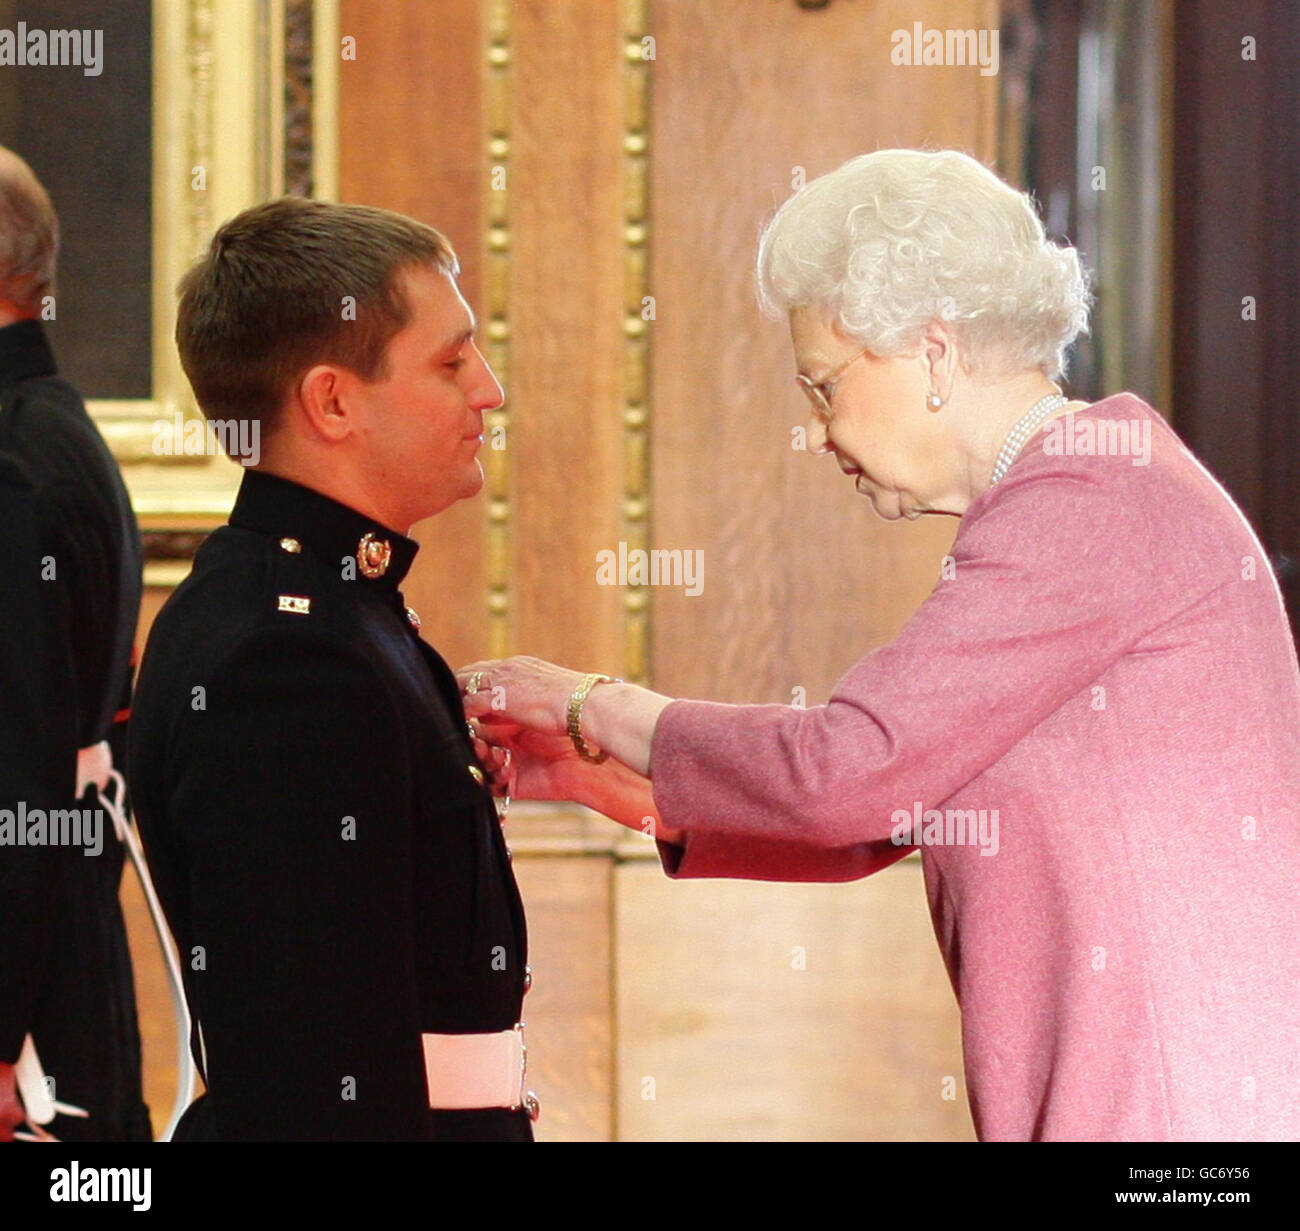 Royal Marine Samuel Alexander is decorated with The Military Cross by The Queen at Windsor Castle, for services in Afghanistan. Stock Photo